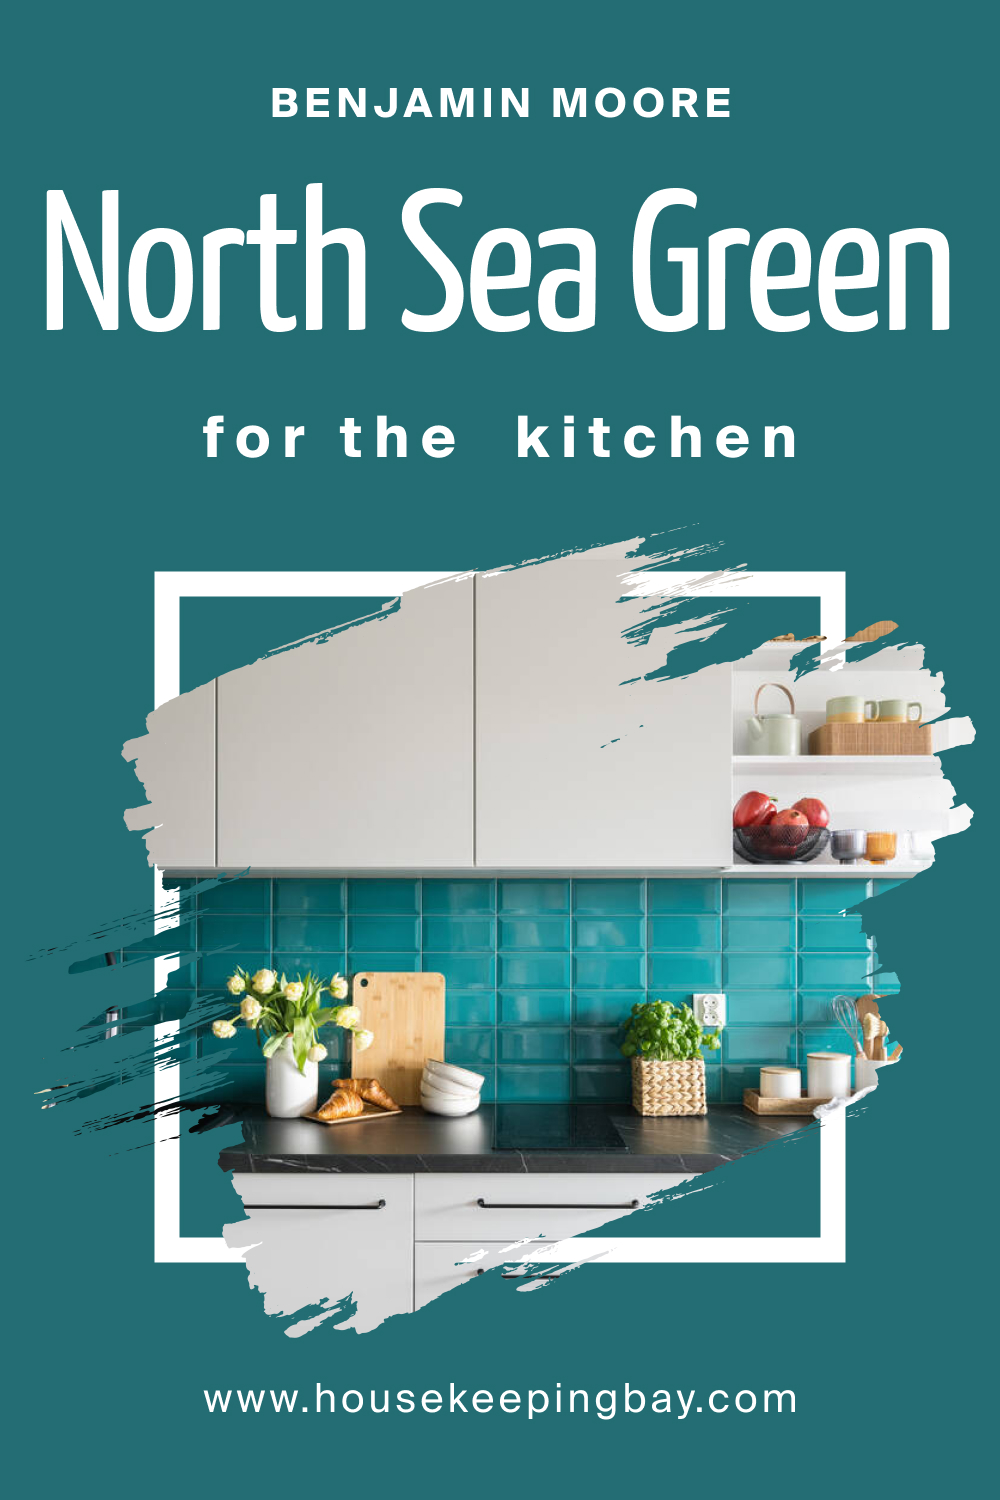 Benjamin Moore. North Sea Green 2053 30 for the Kitchen